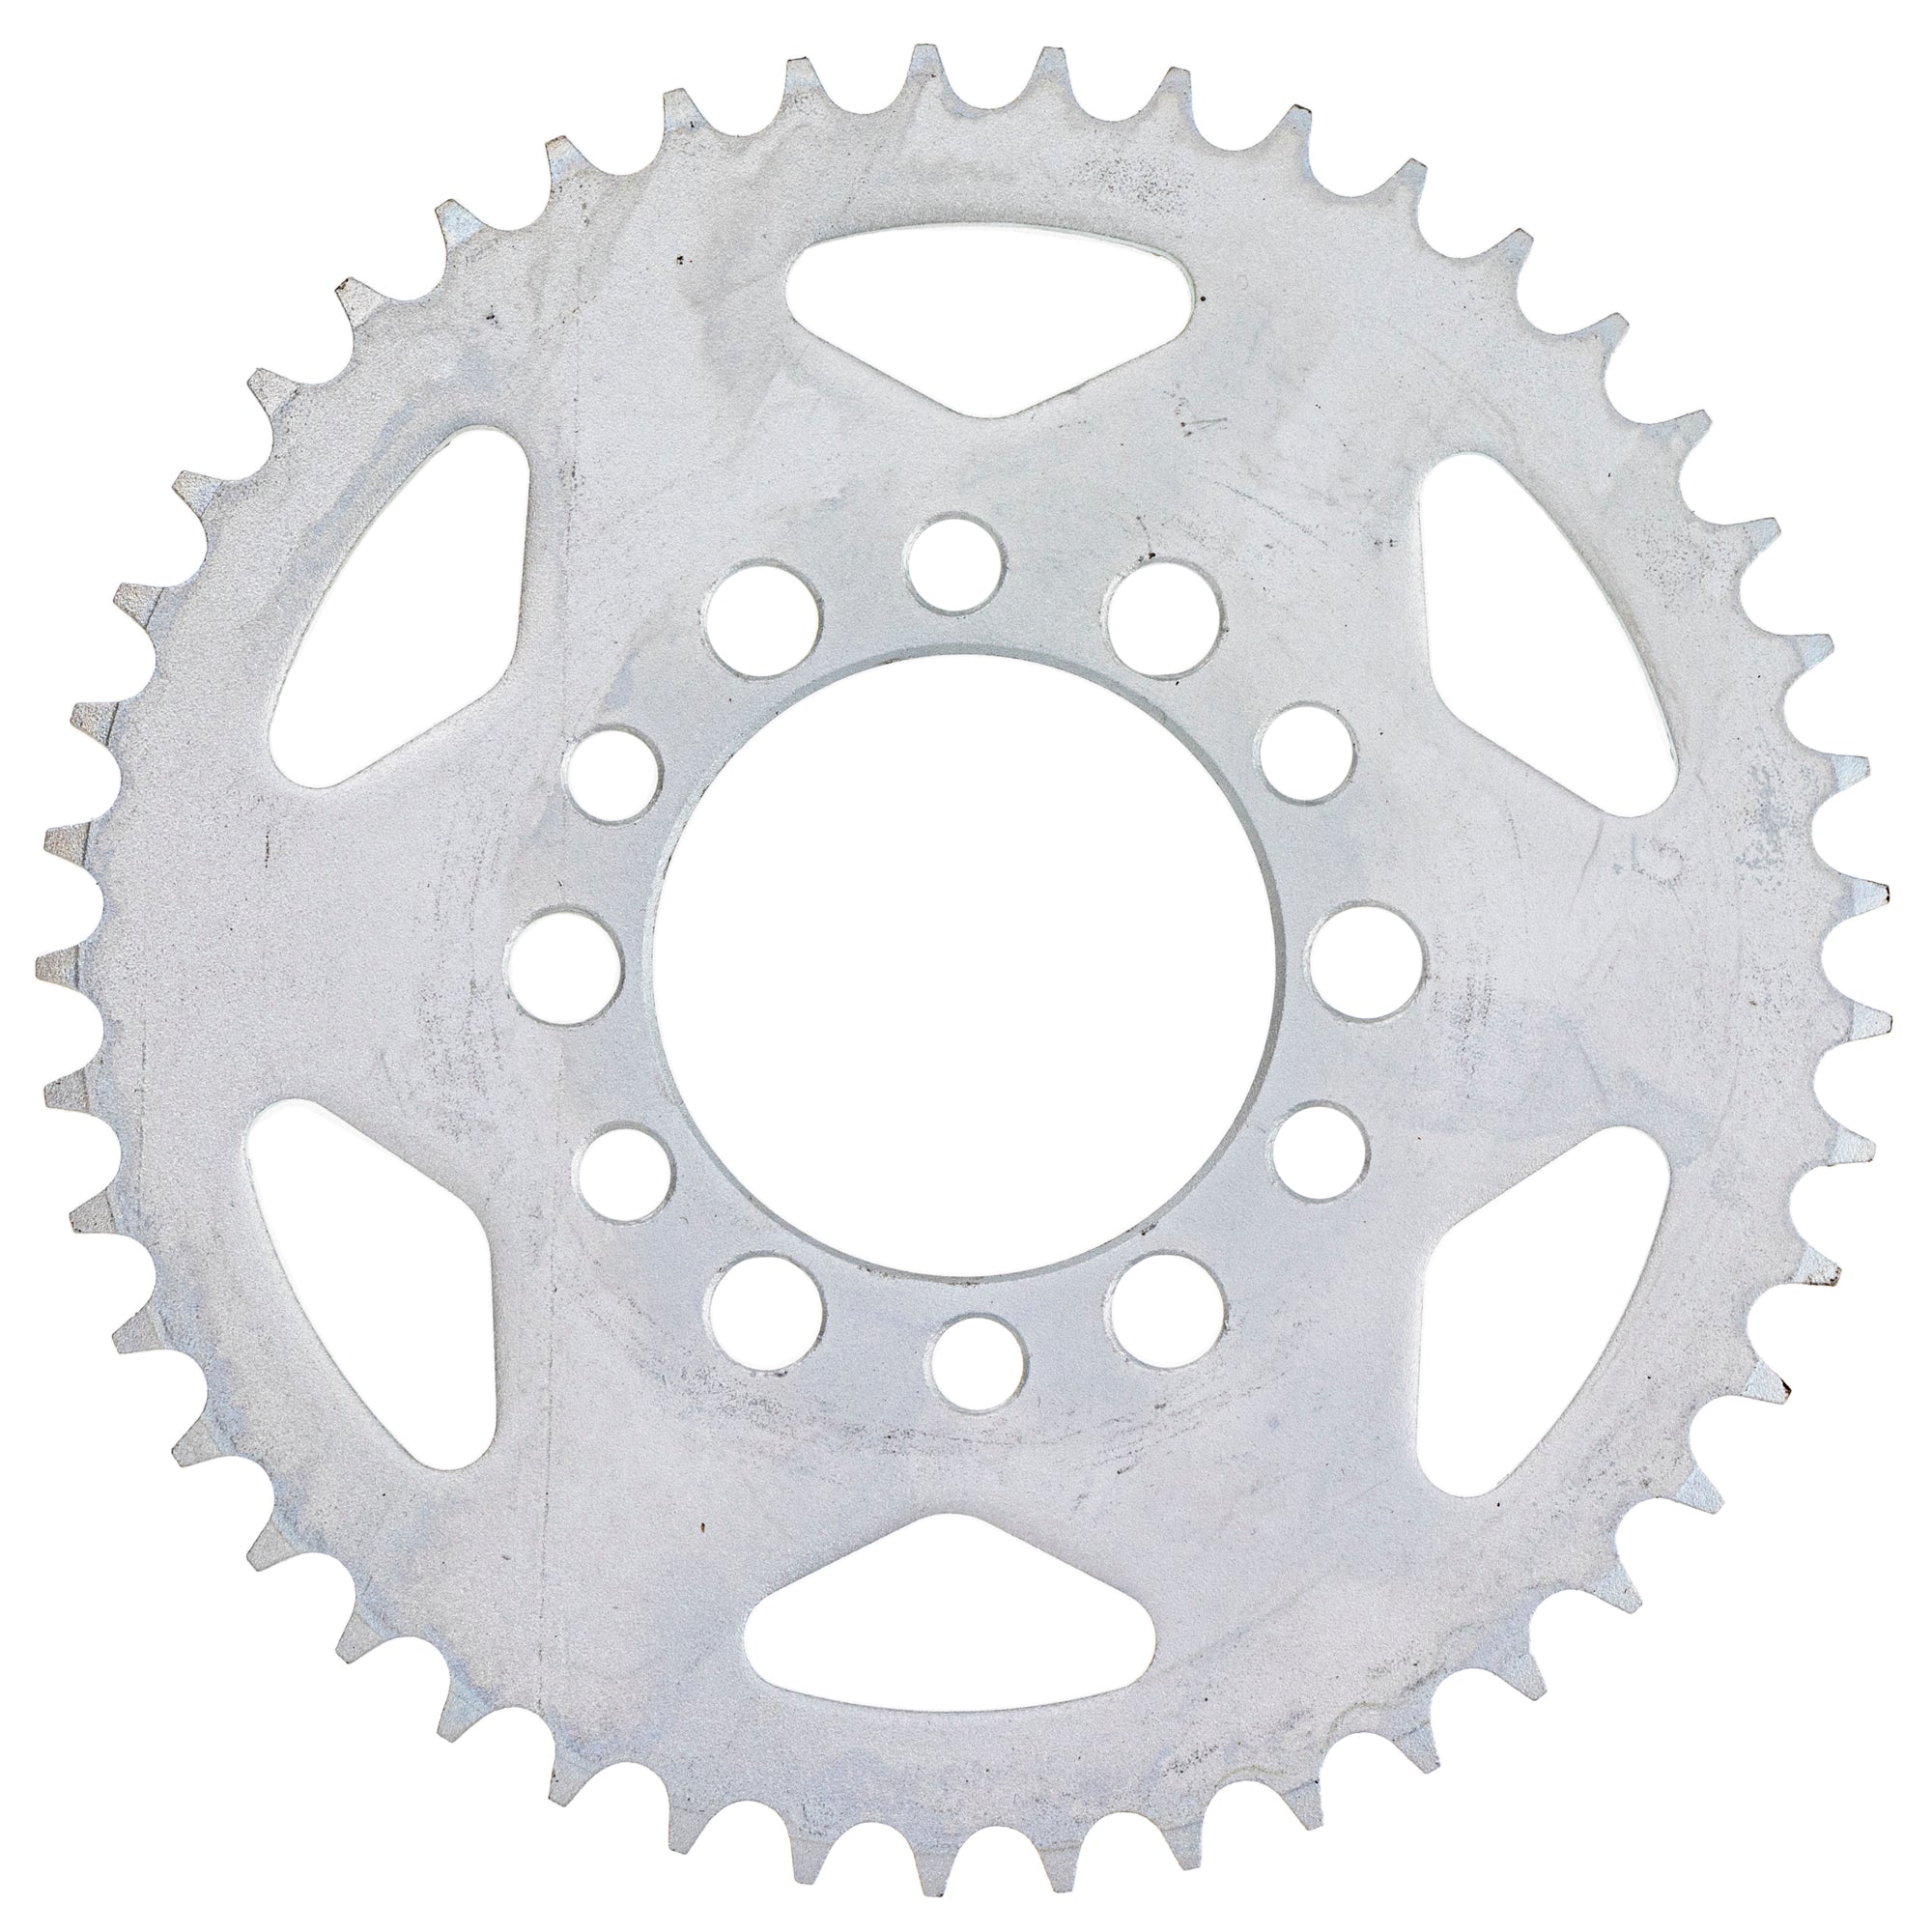 428 Front 13T Rear 45T Drive Sprocket Kit for Yamaha AT1 CT1 CT3